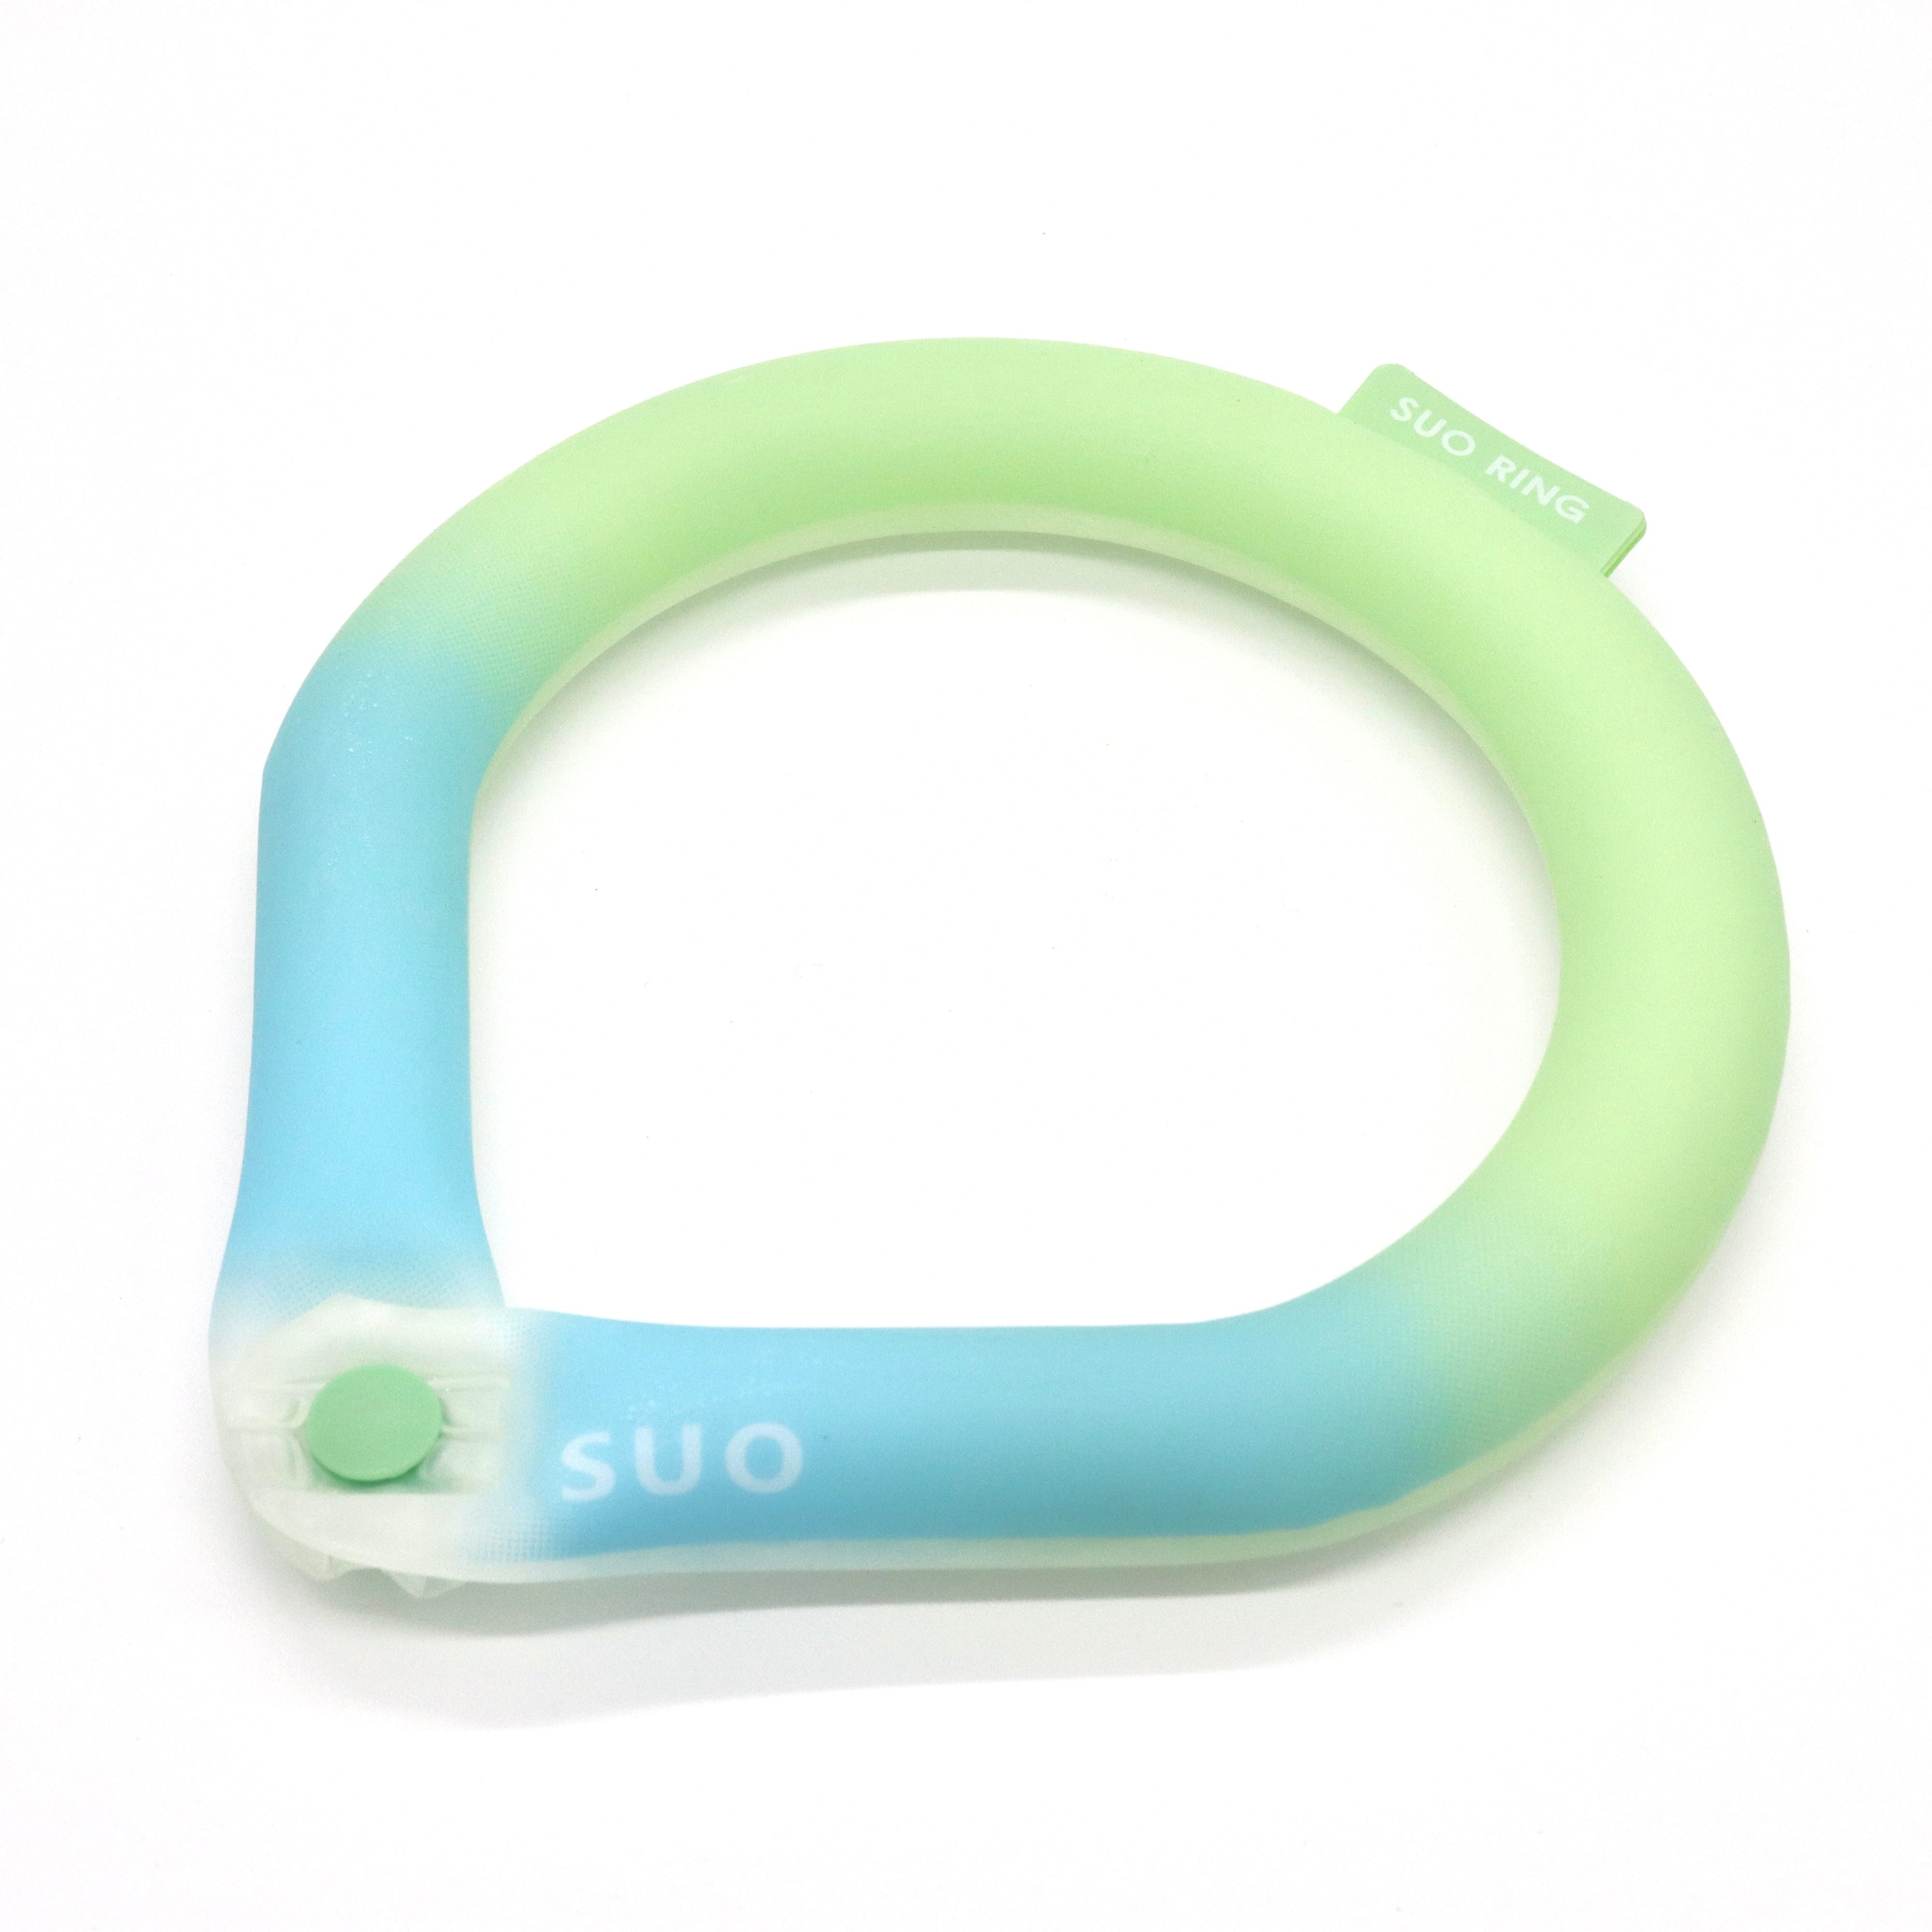 SUO RING 28°ICE for DOG gradation 버튼 포함